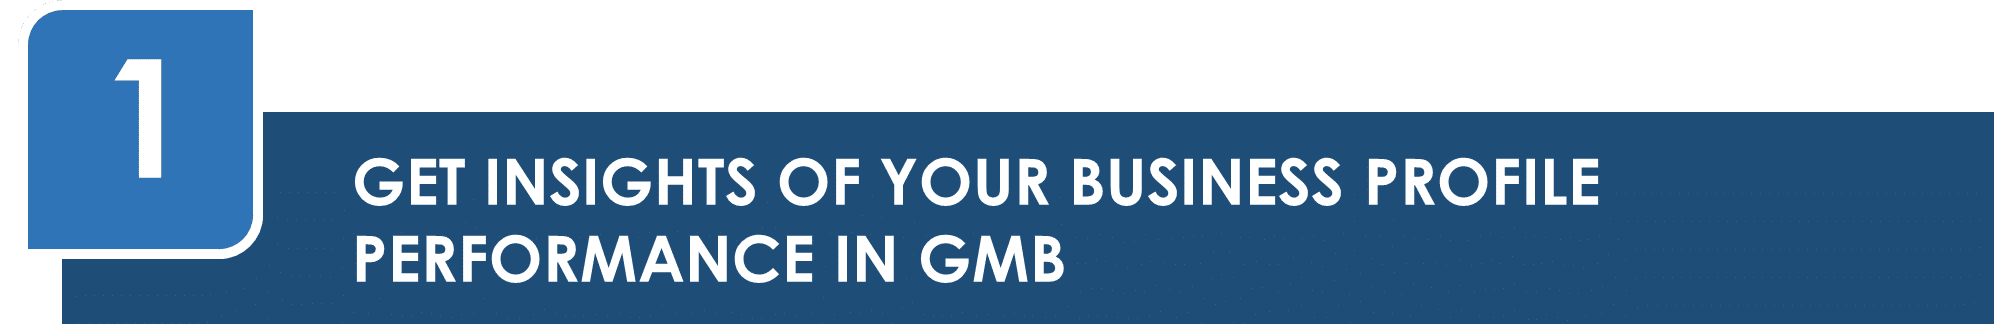 Get Insights of Your Business Profile in Google My Business GMB